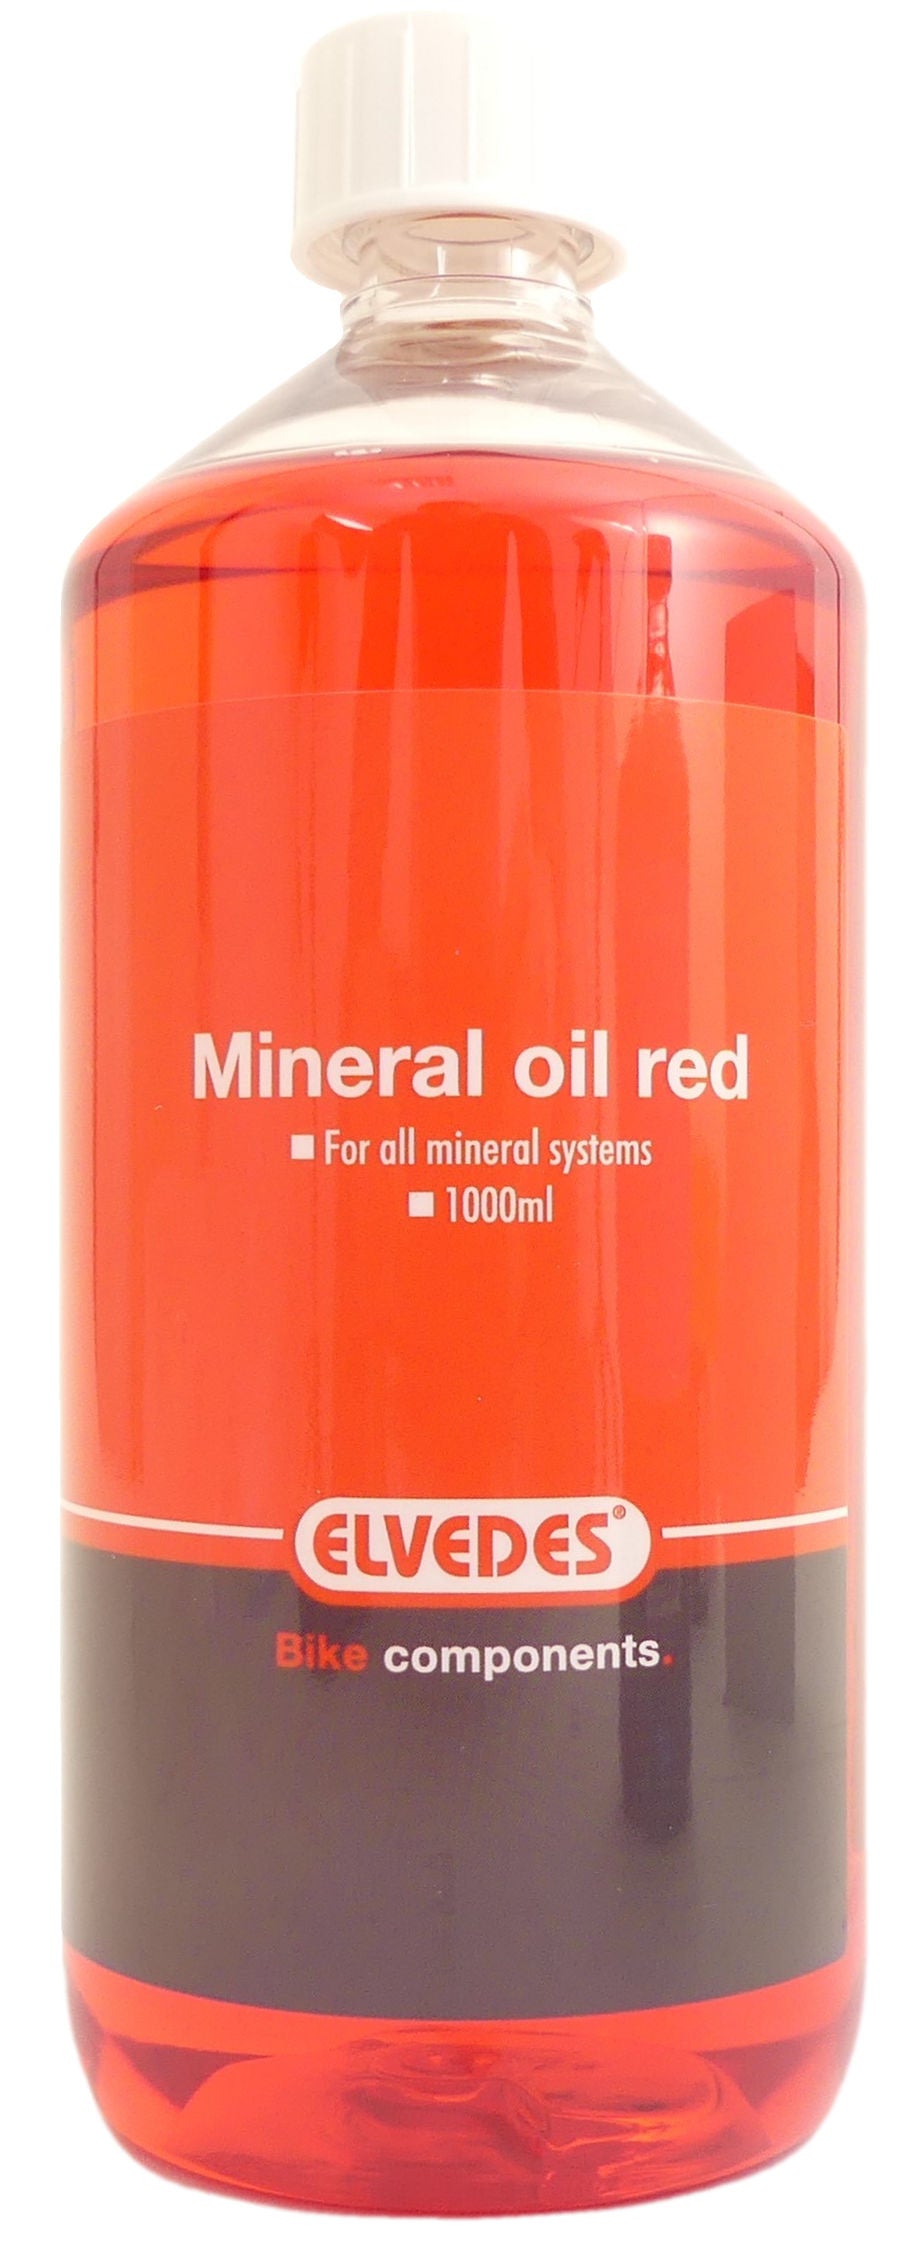 Oil Elvedes Red Mineral Líquido